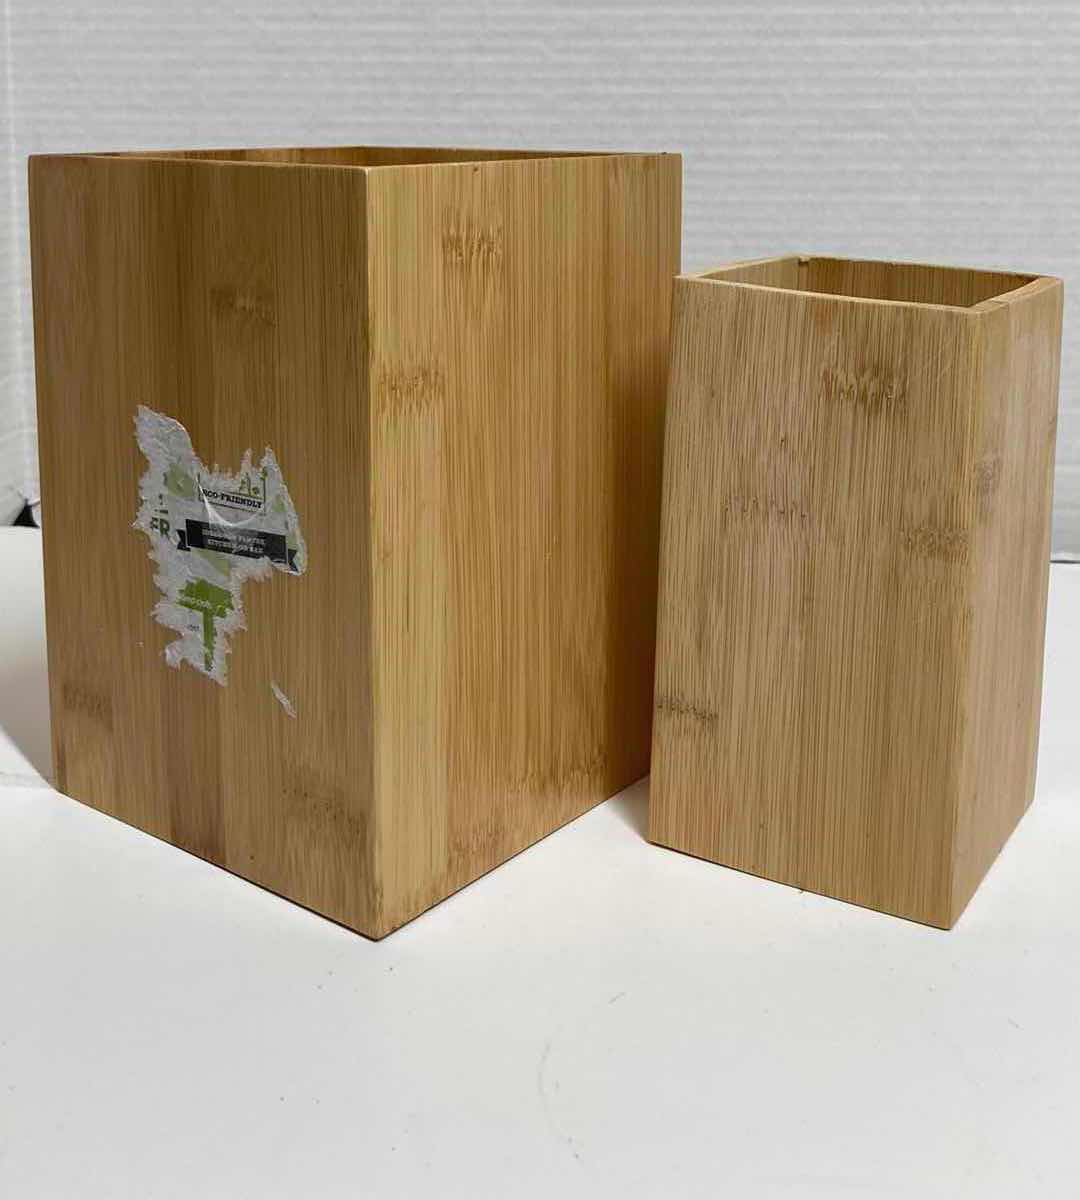 Photo 5 of NEW HANDMADE HOLIDAY CRAFT WOOD DECOR BOXES (3) W NATURAL WOOD BOXES (2)